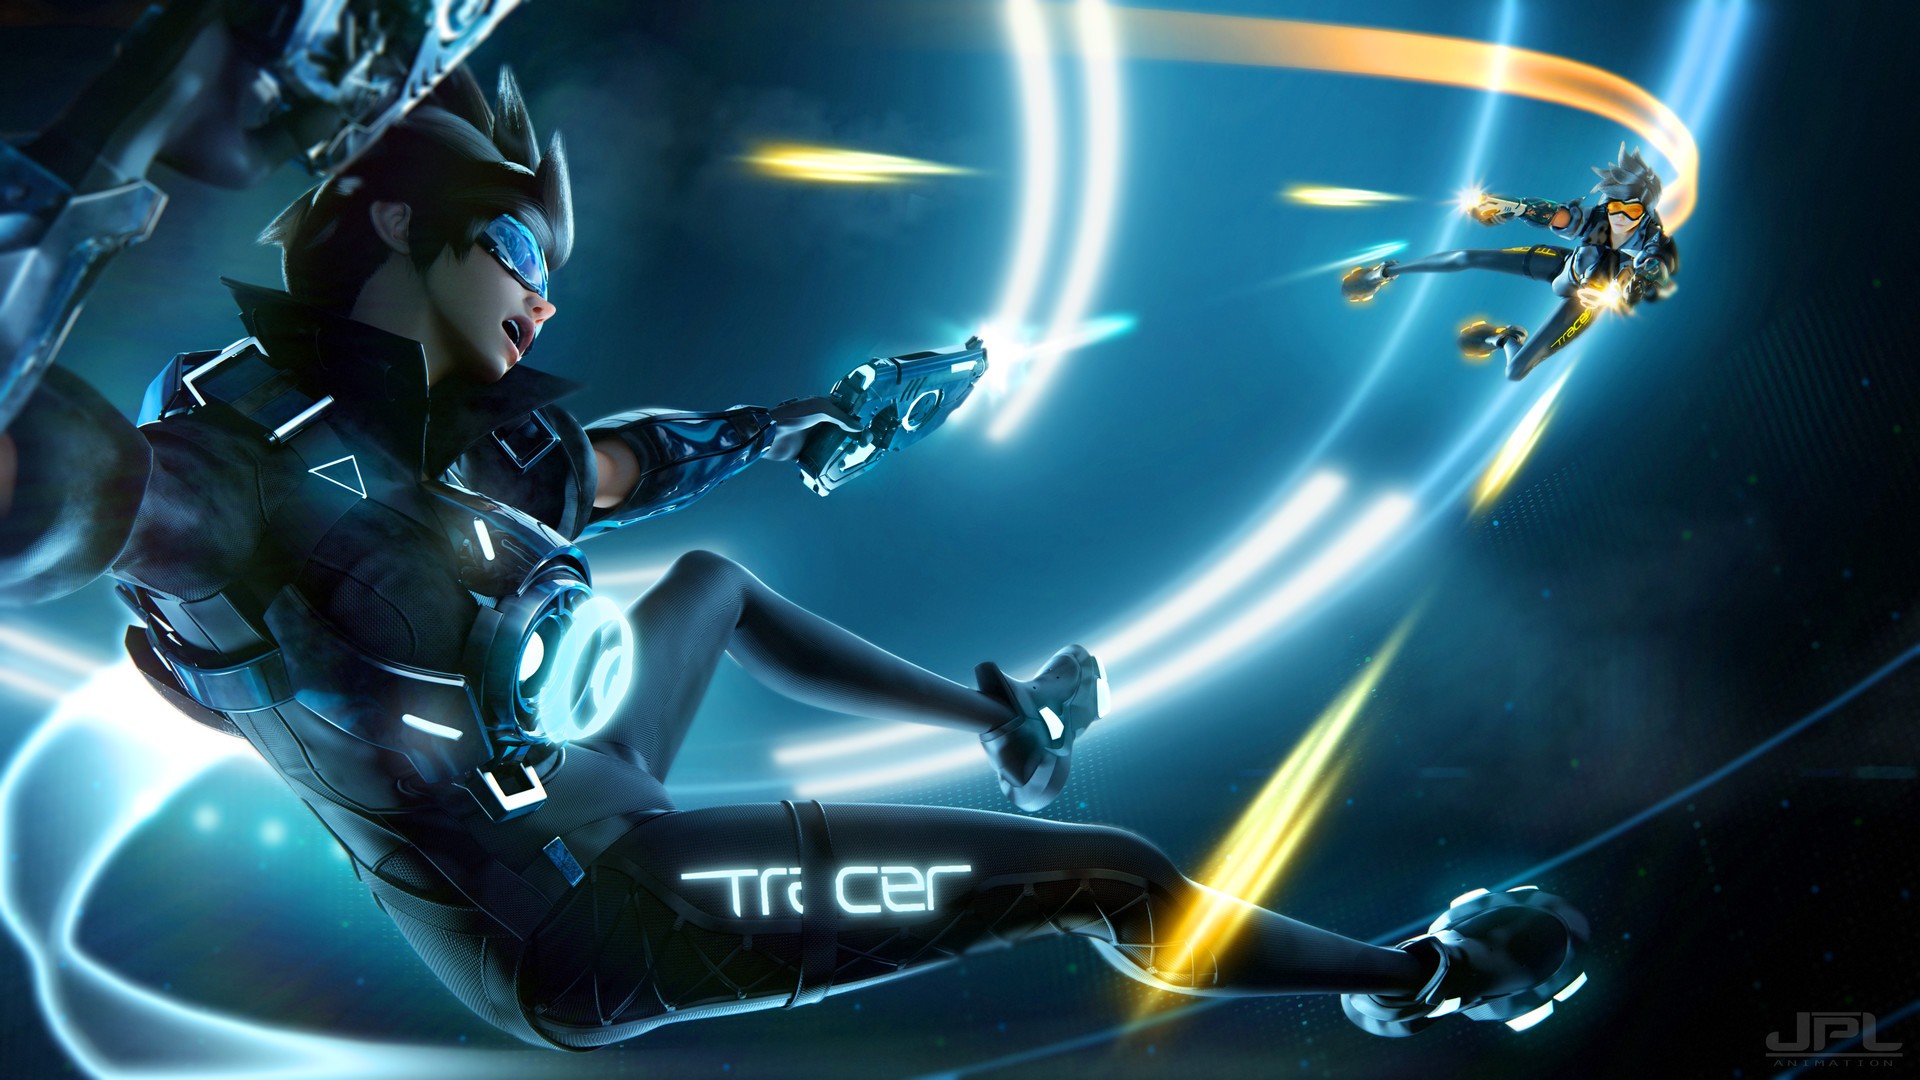 General 1920x1080 Overwatch Tracer (Overwatch) crossover Tron women gun video games video game characters